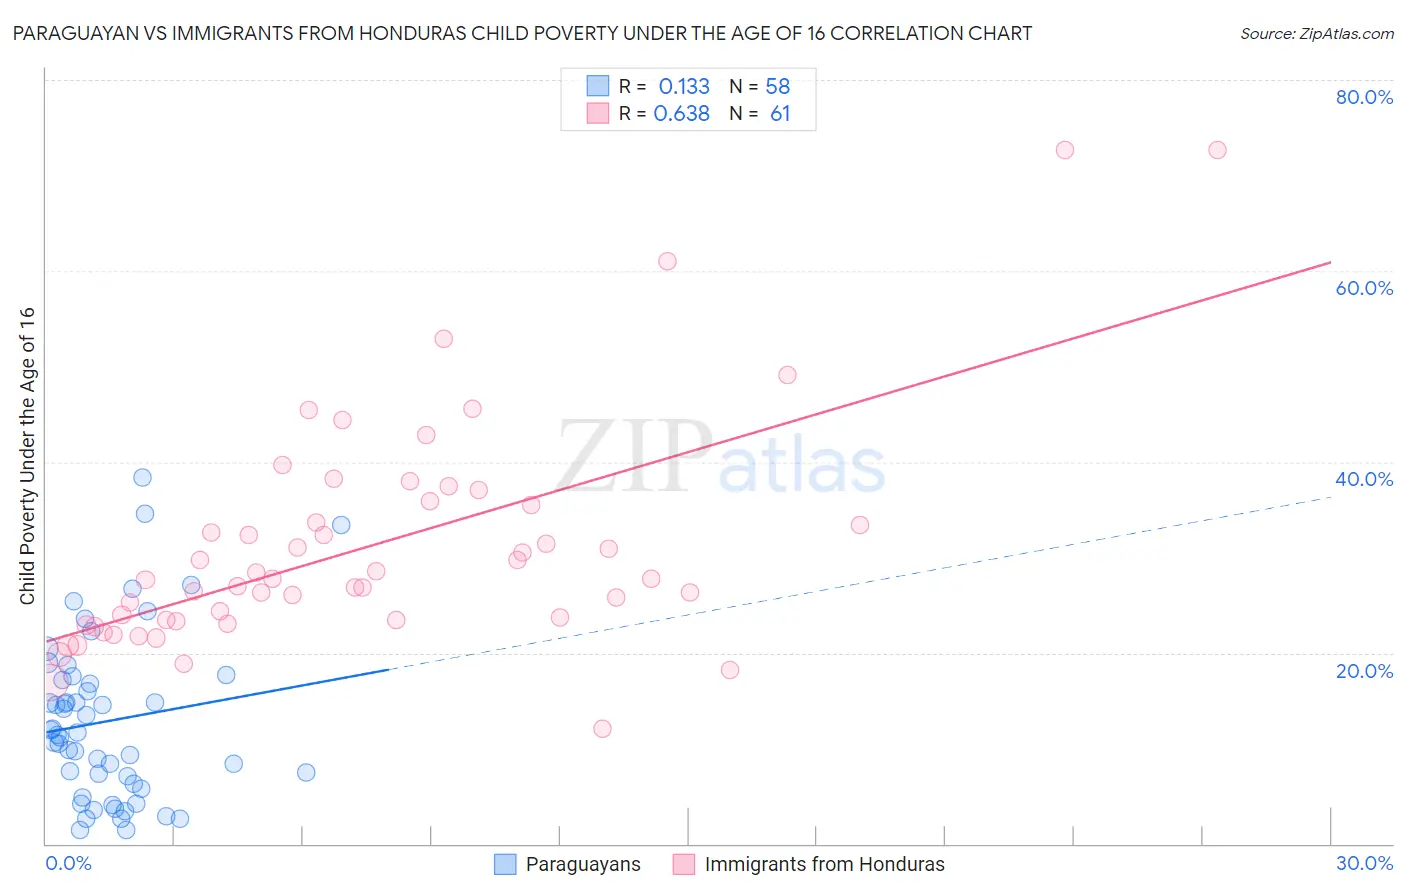 Paraguayan vs Immigrants from Honduras Child Poverty Under the Age of 16